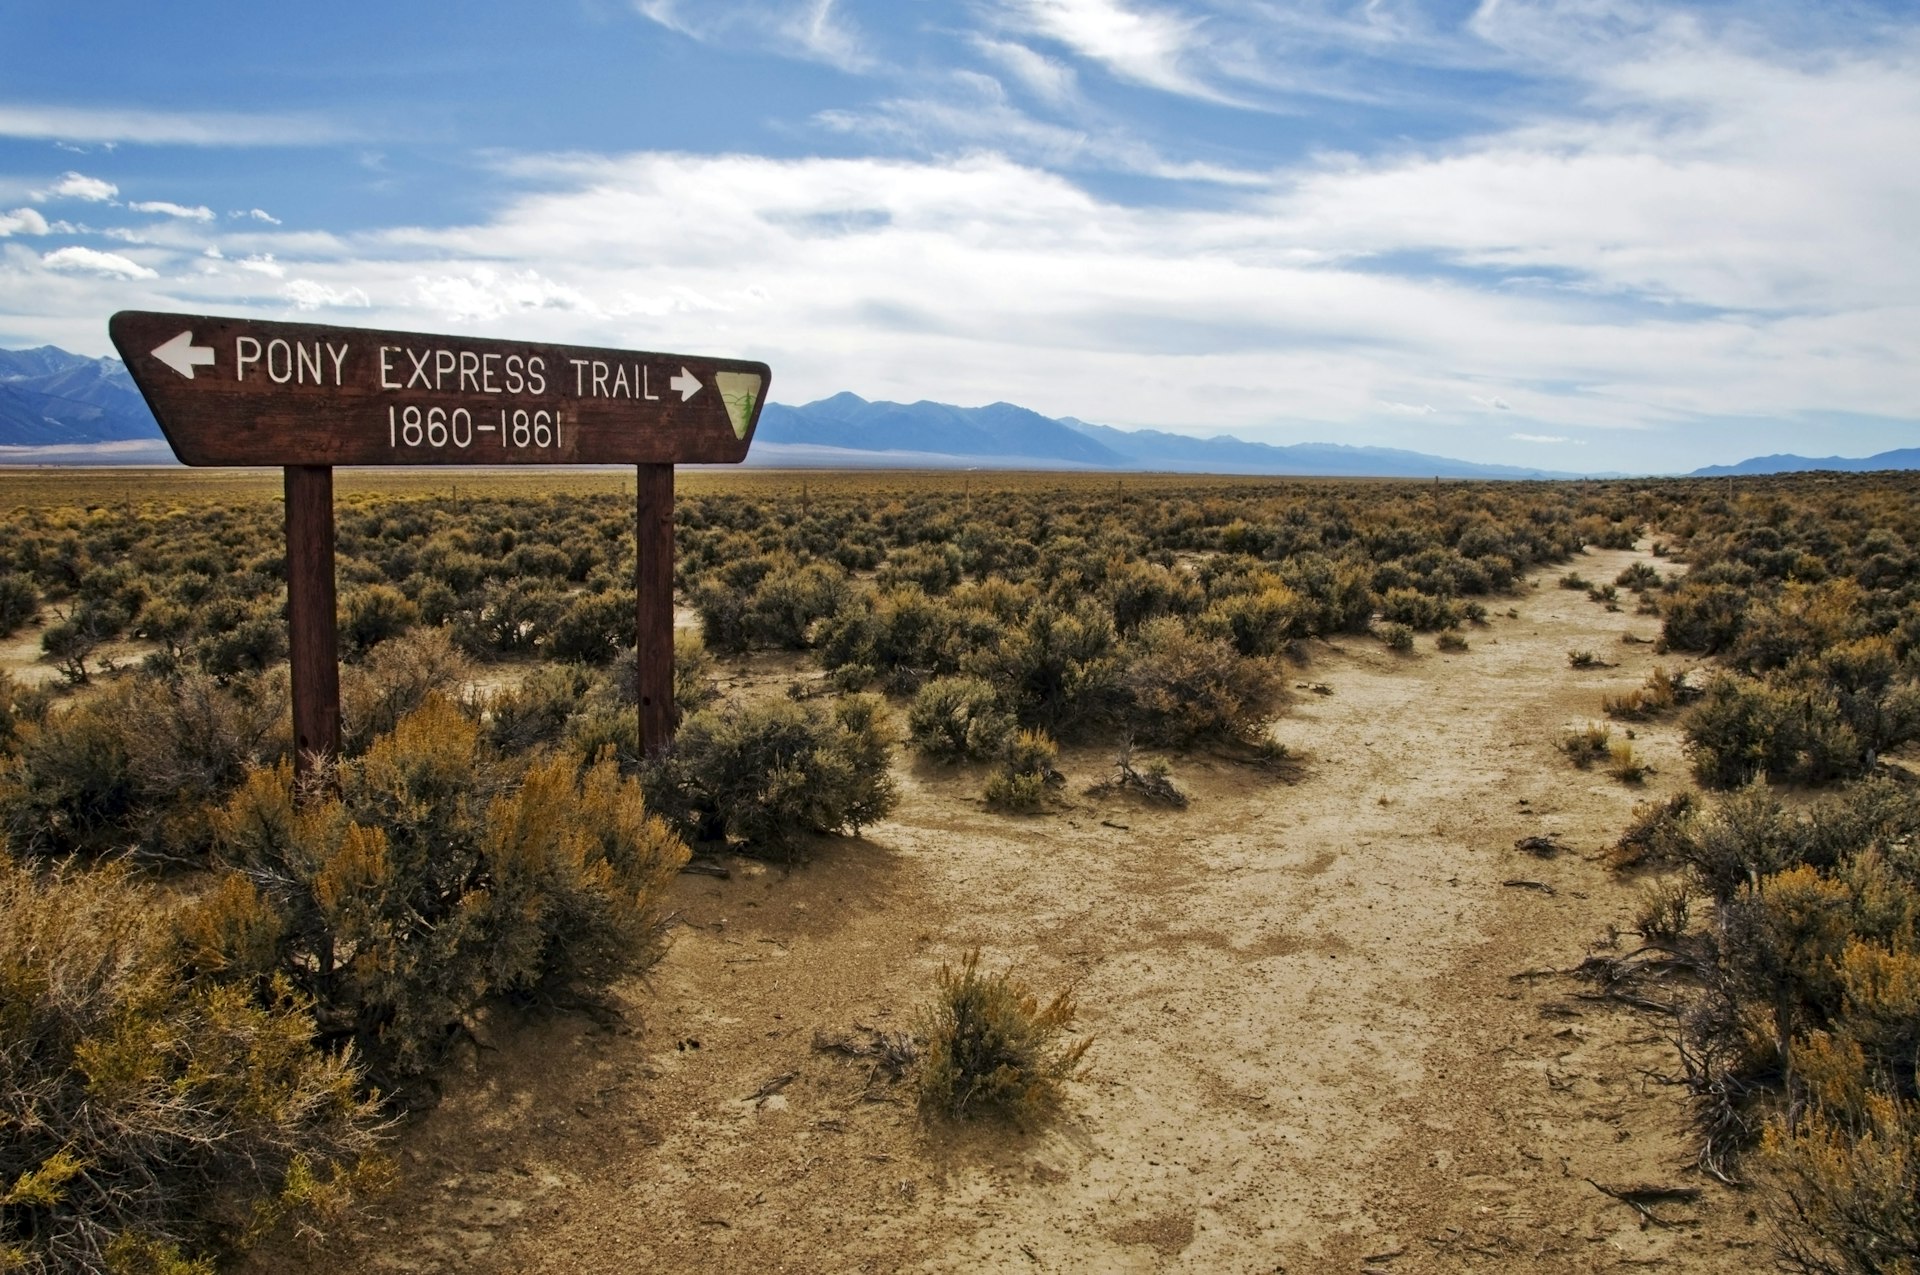 A sign shows the old Pony Express Route off of Highway 50, Nevada.